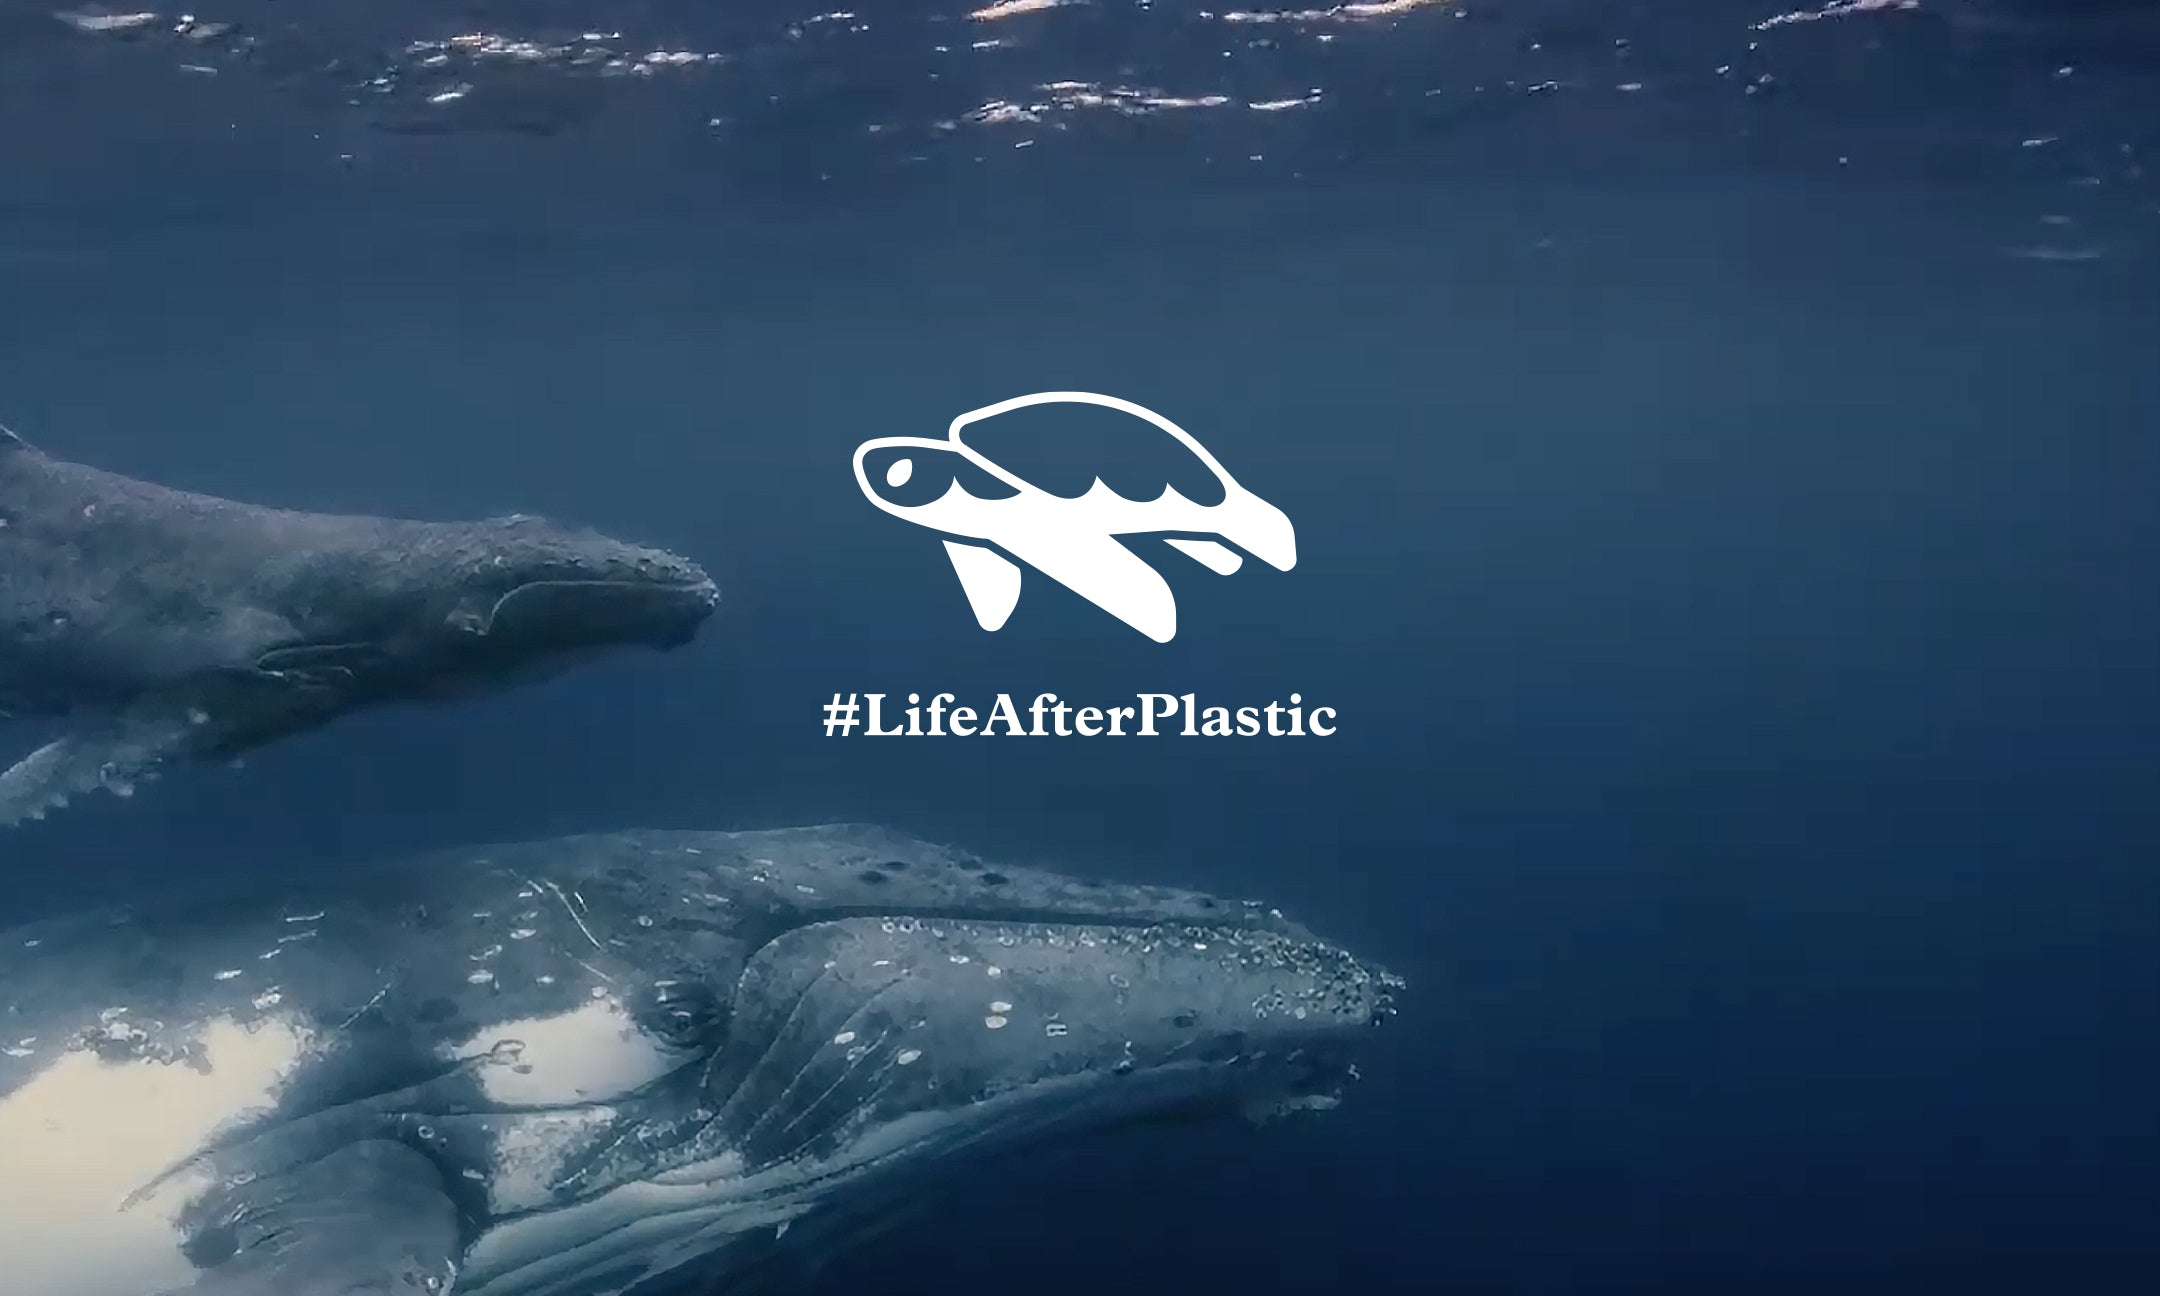 Creating a #LifeAfterPlastic